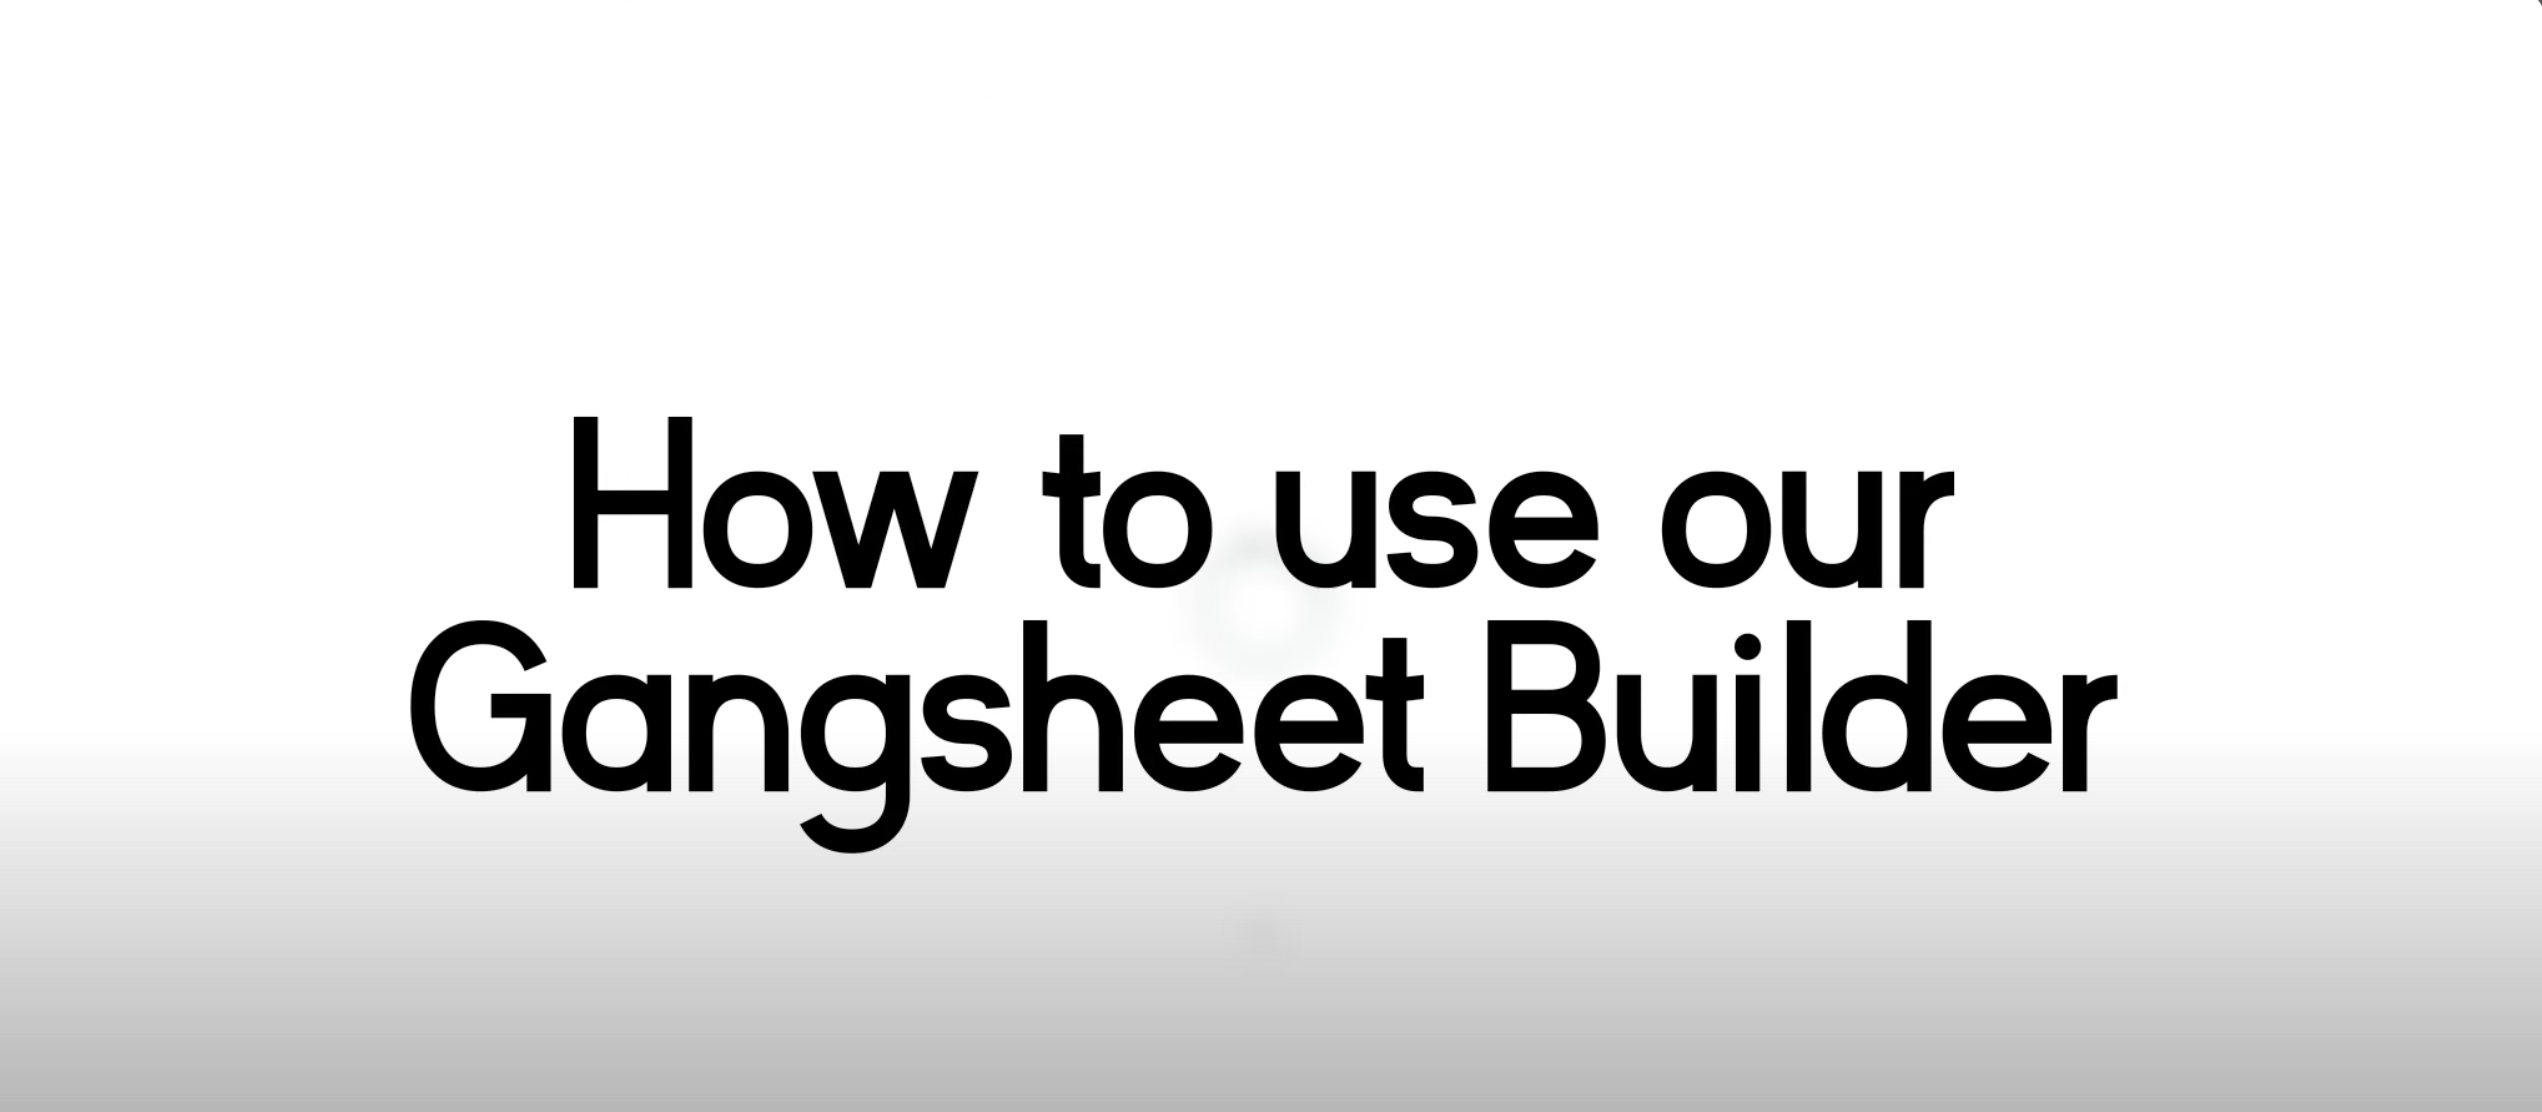 Load video: how to use the gang sheet builder video